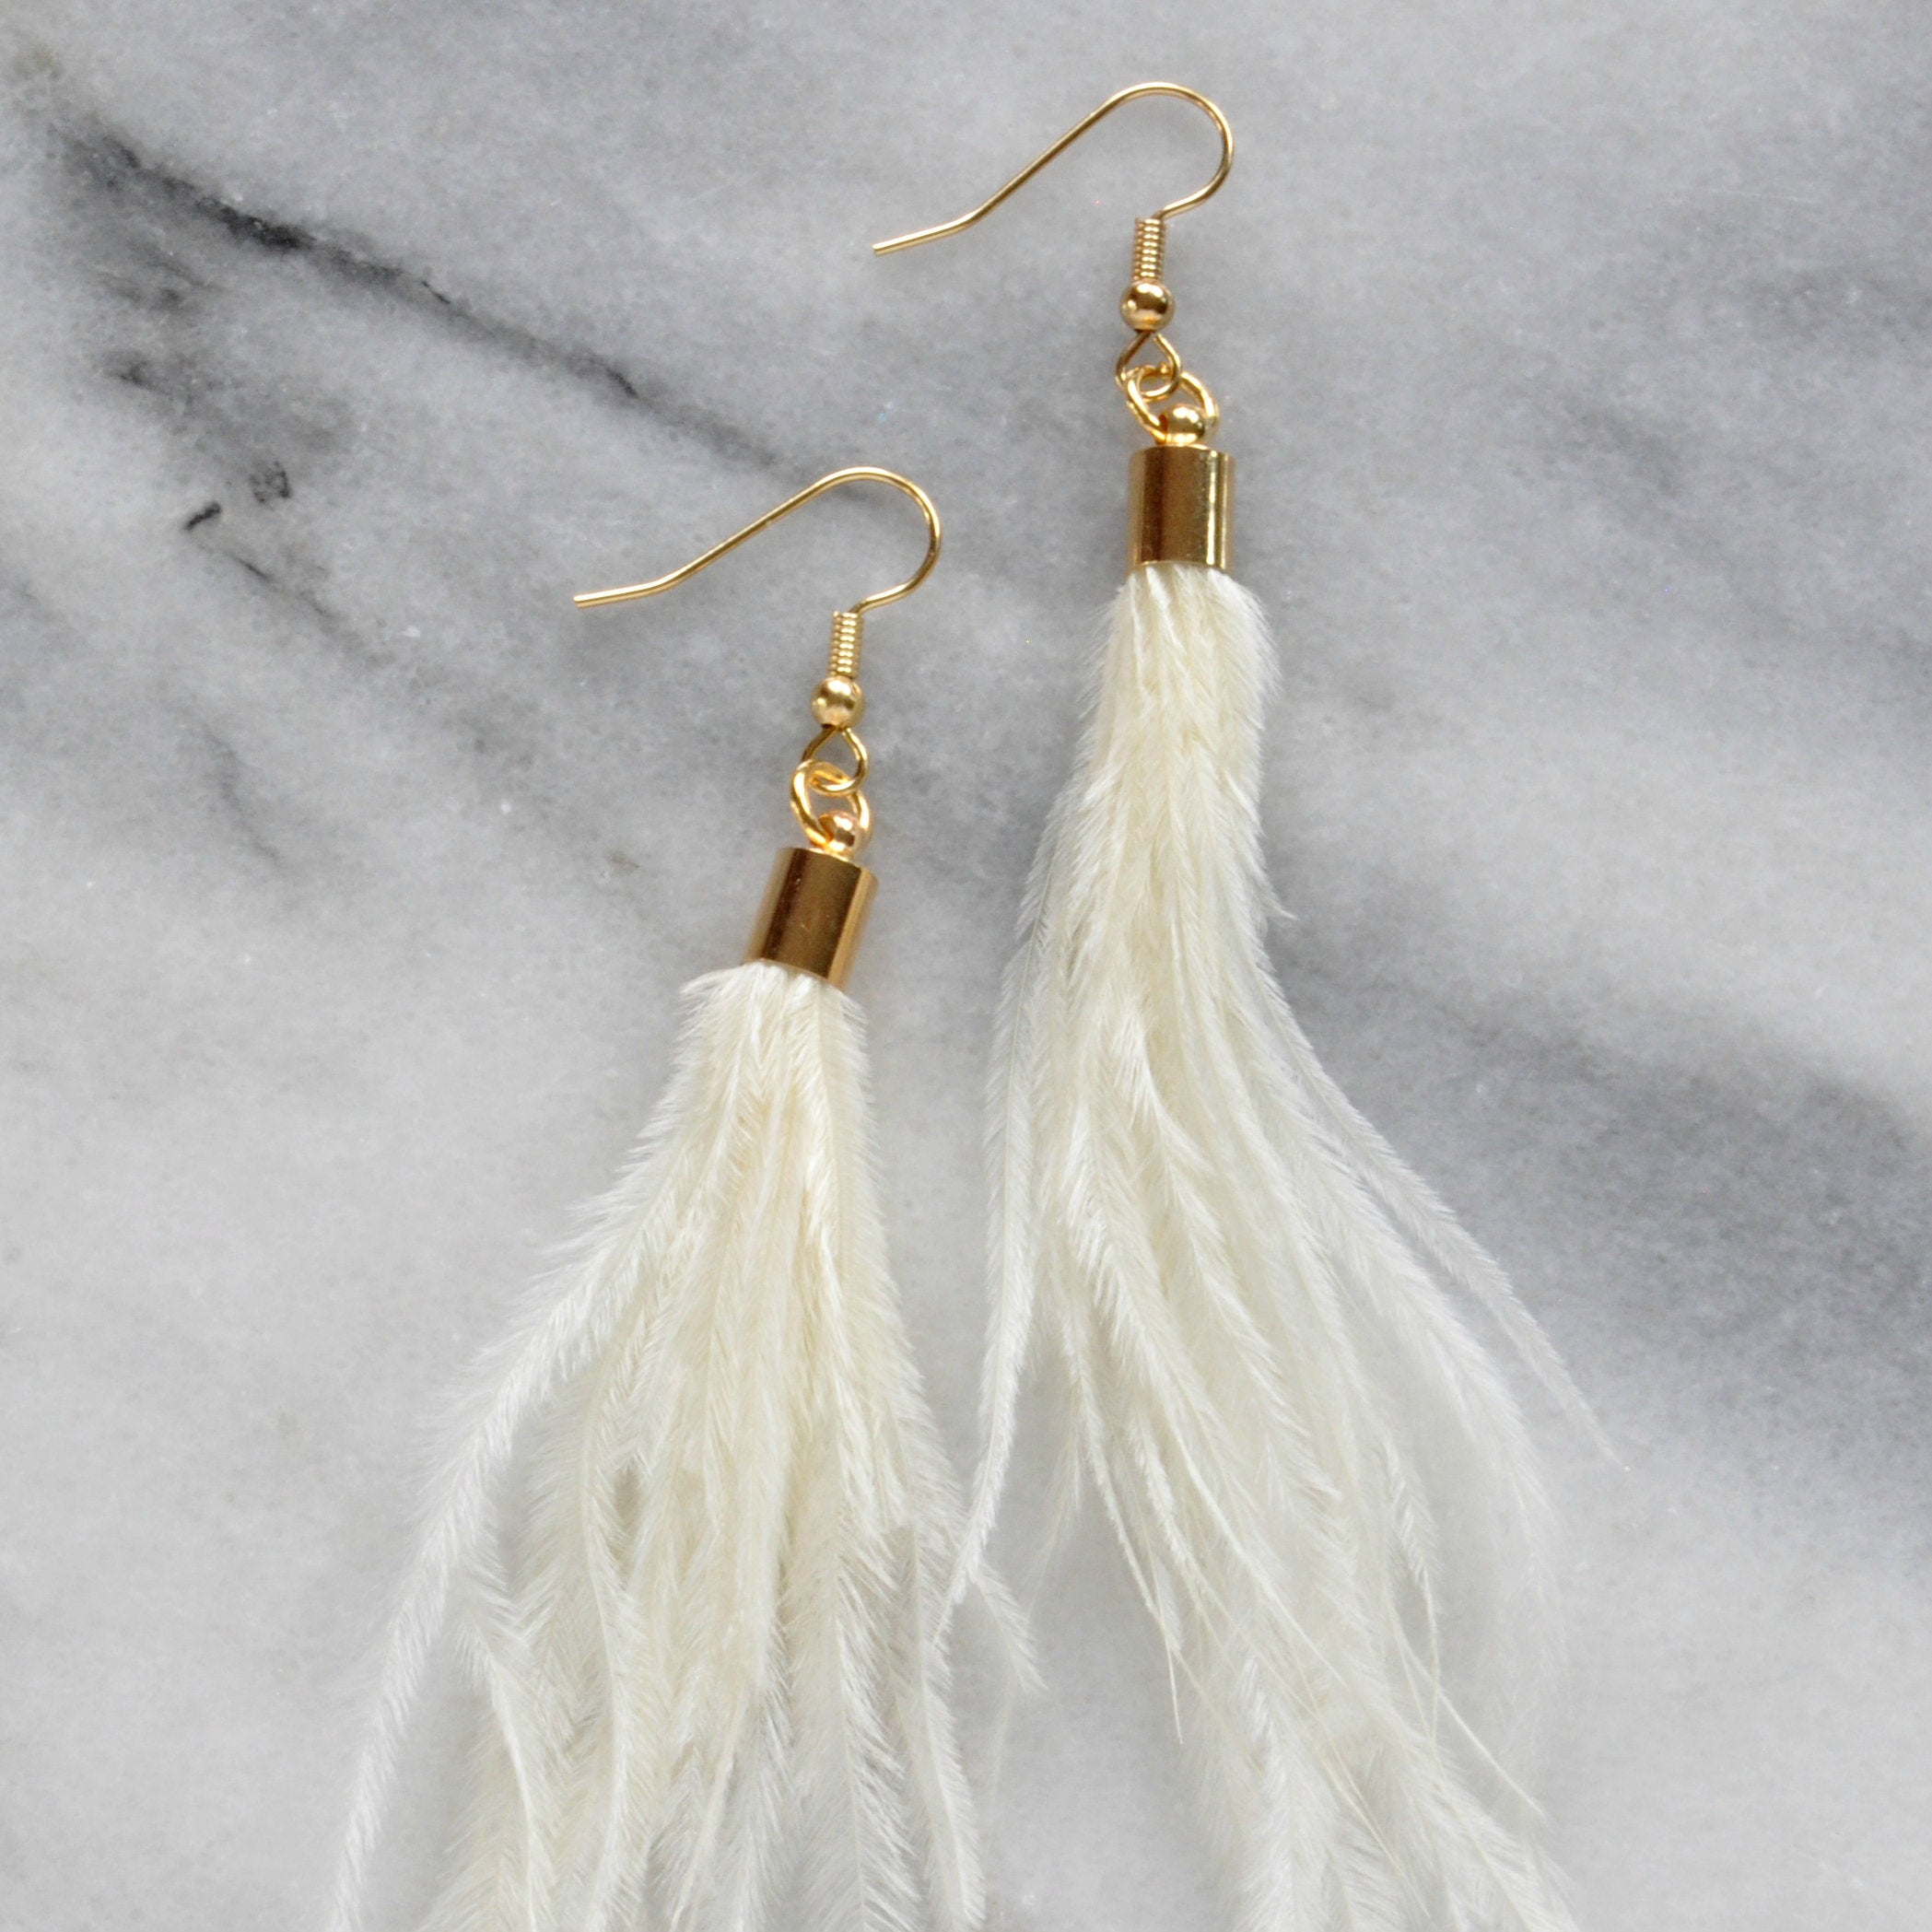 Libby & Smee ivory ostrich feather earrings with gold cap, still life on kraft logo earring card